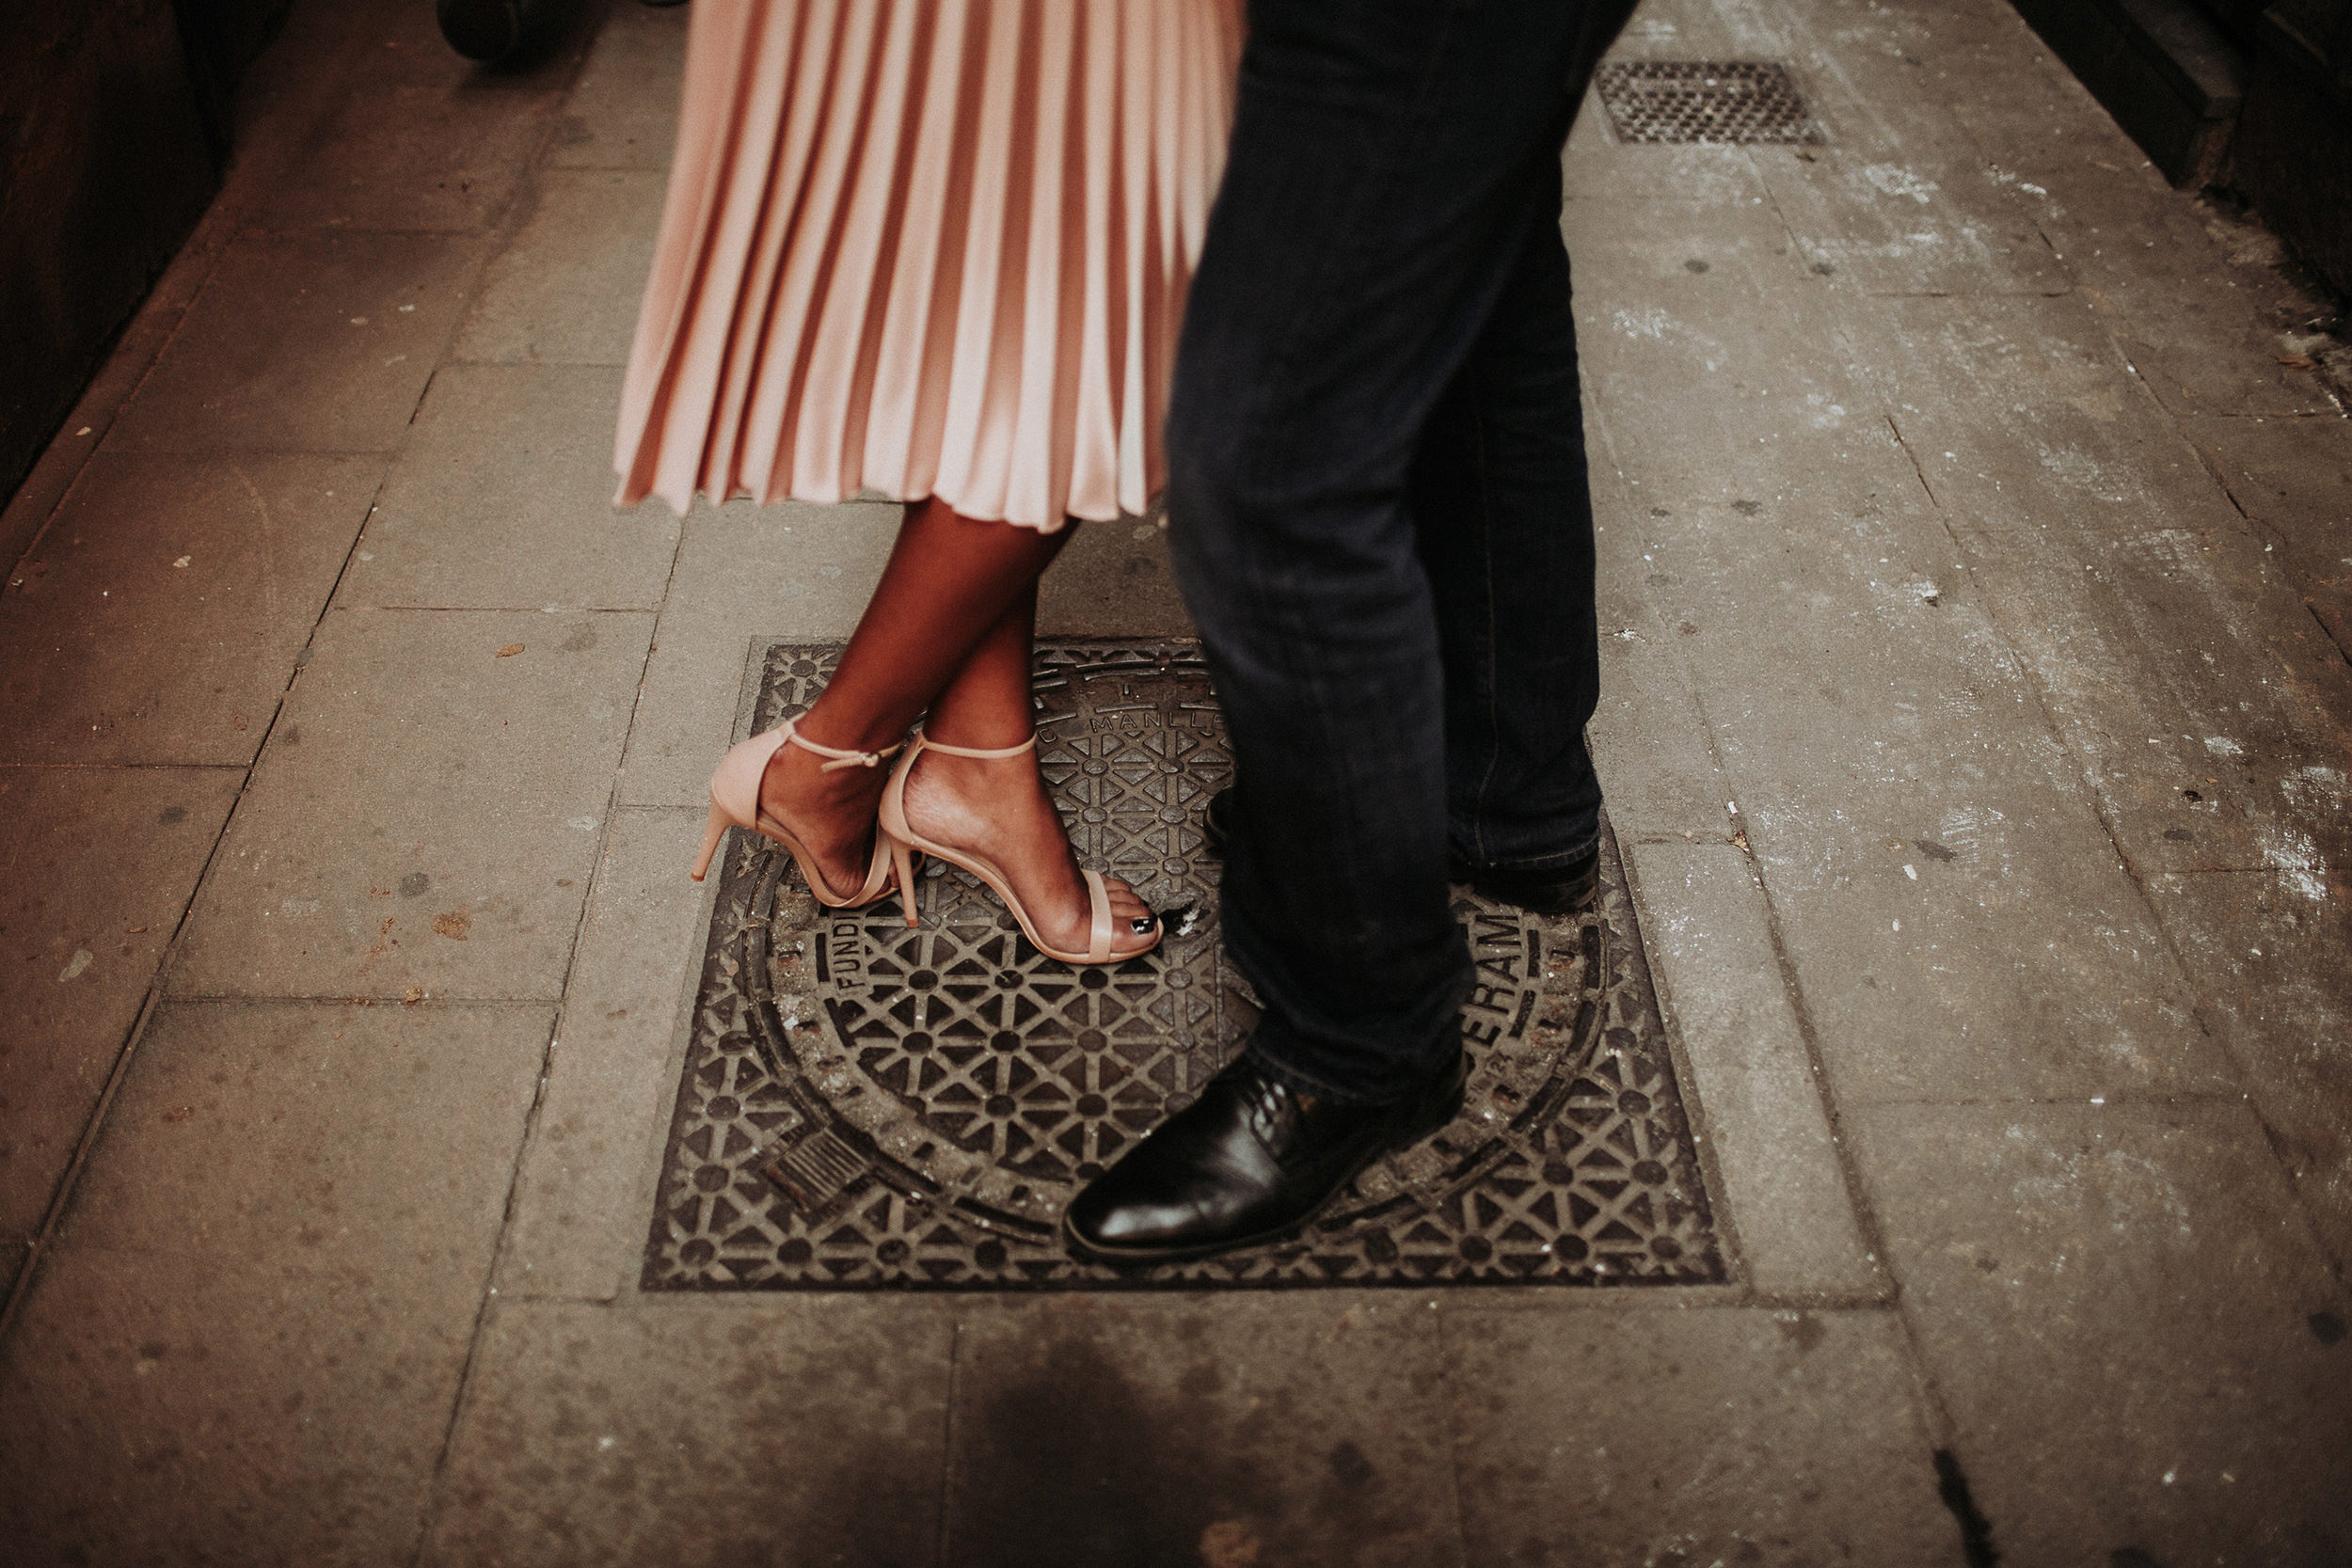 engagement photo locations in Barcelona